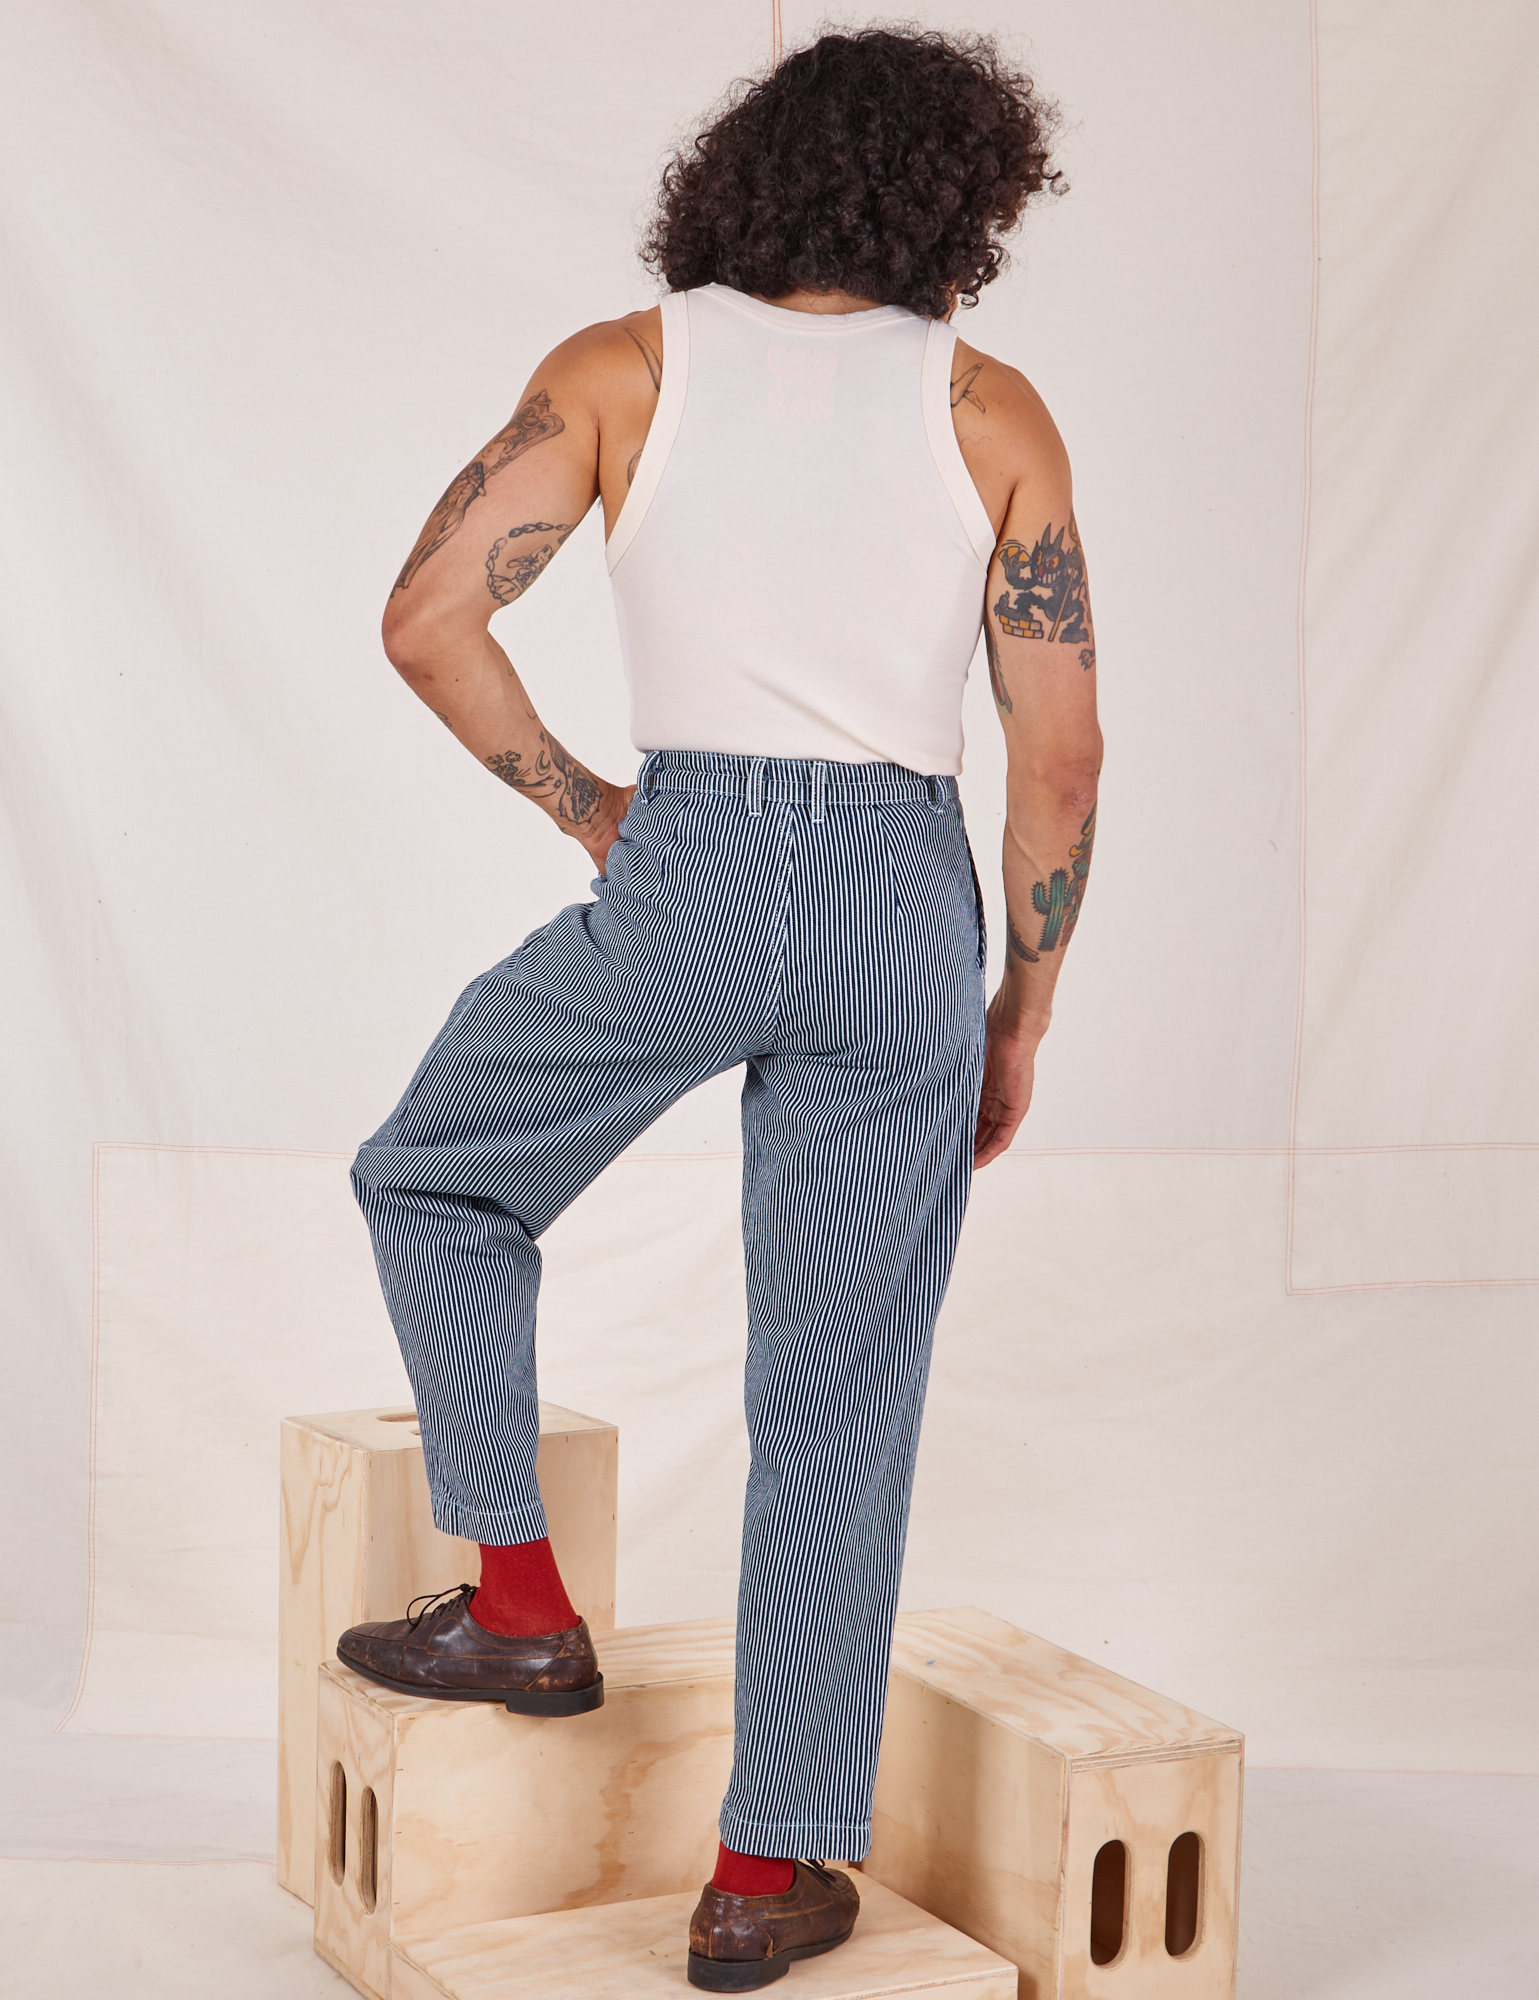 Back view of Denim Trouser Jeans in Railroad Stripe and Tank Top in vintage tee off-white worn by Jesse